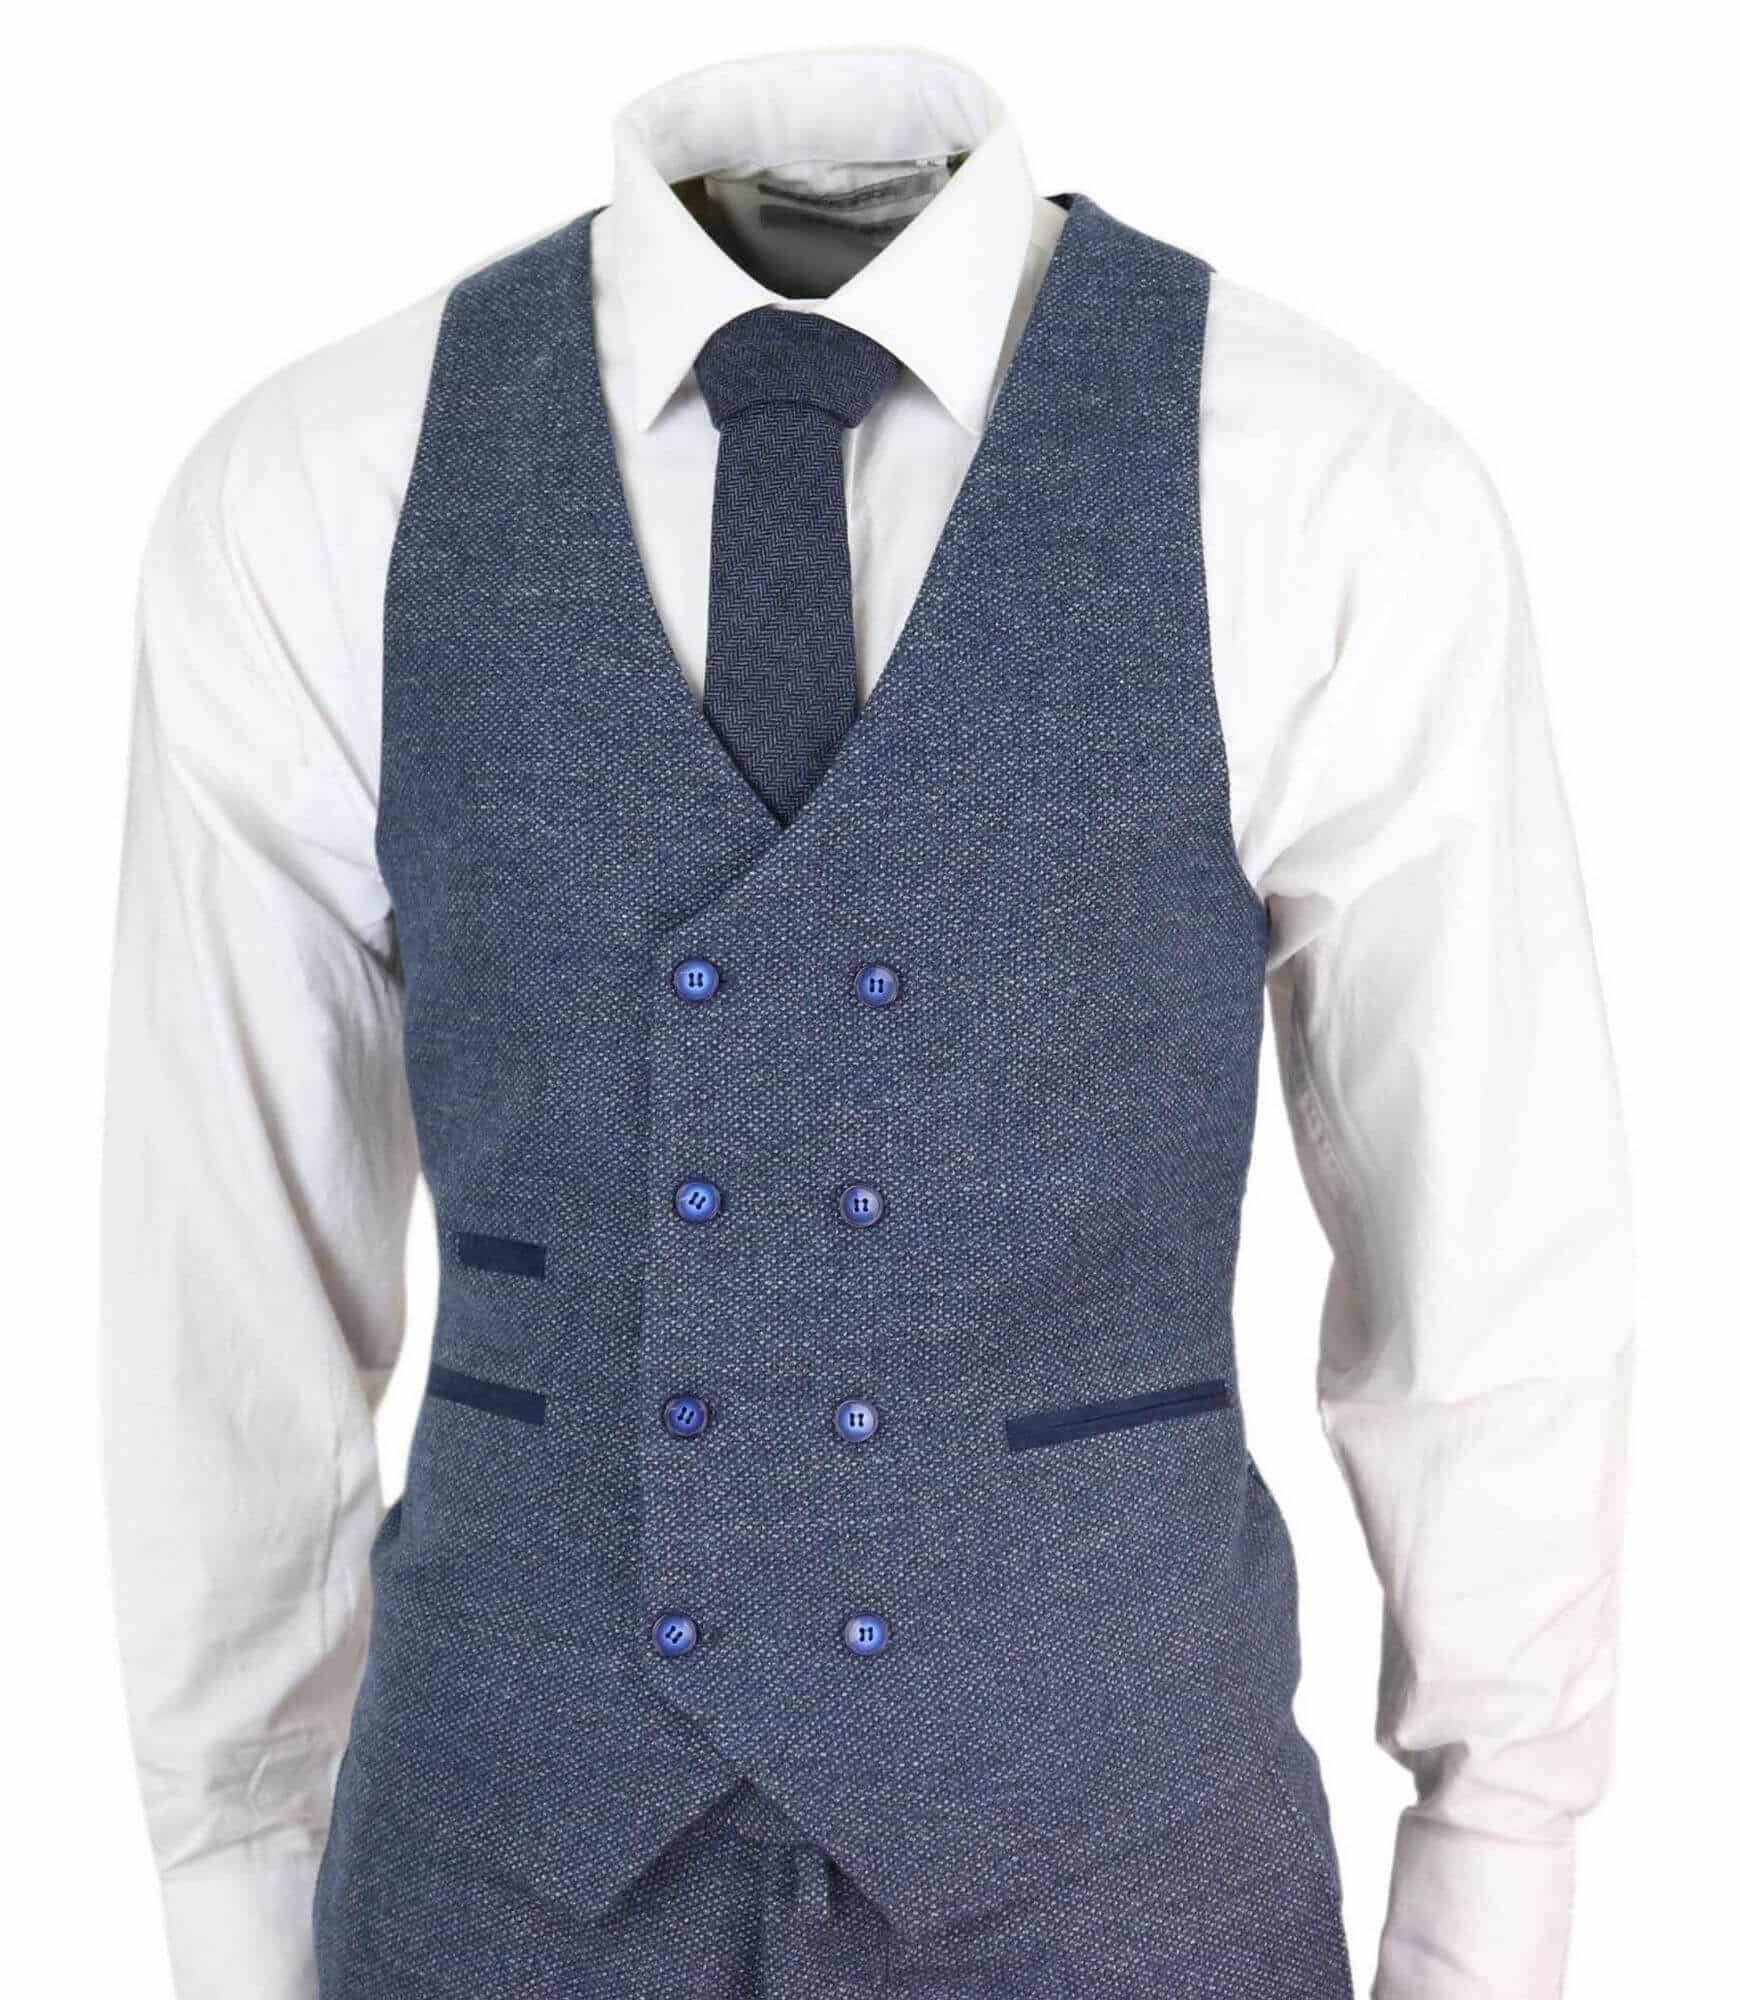 Details more than 85 waistcoat and trousers combo - in.cdgdbentre